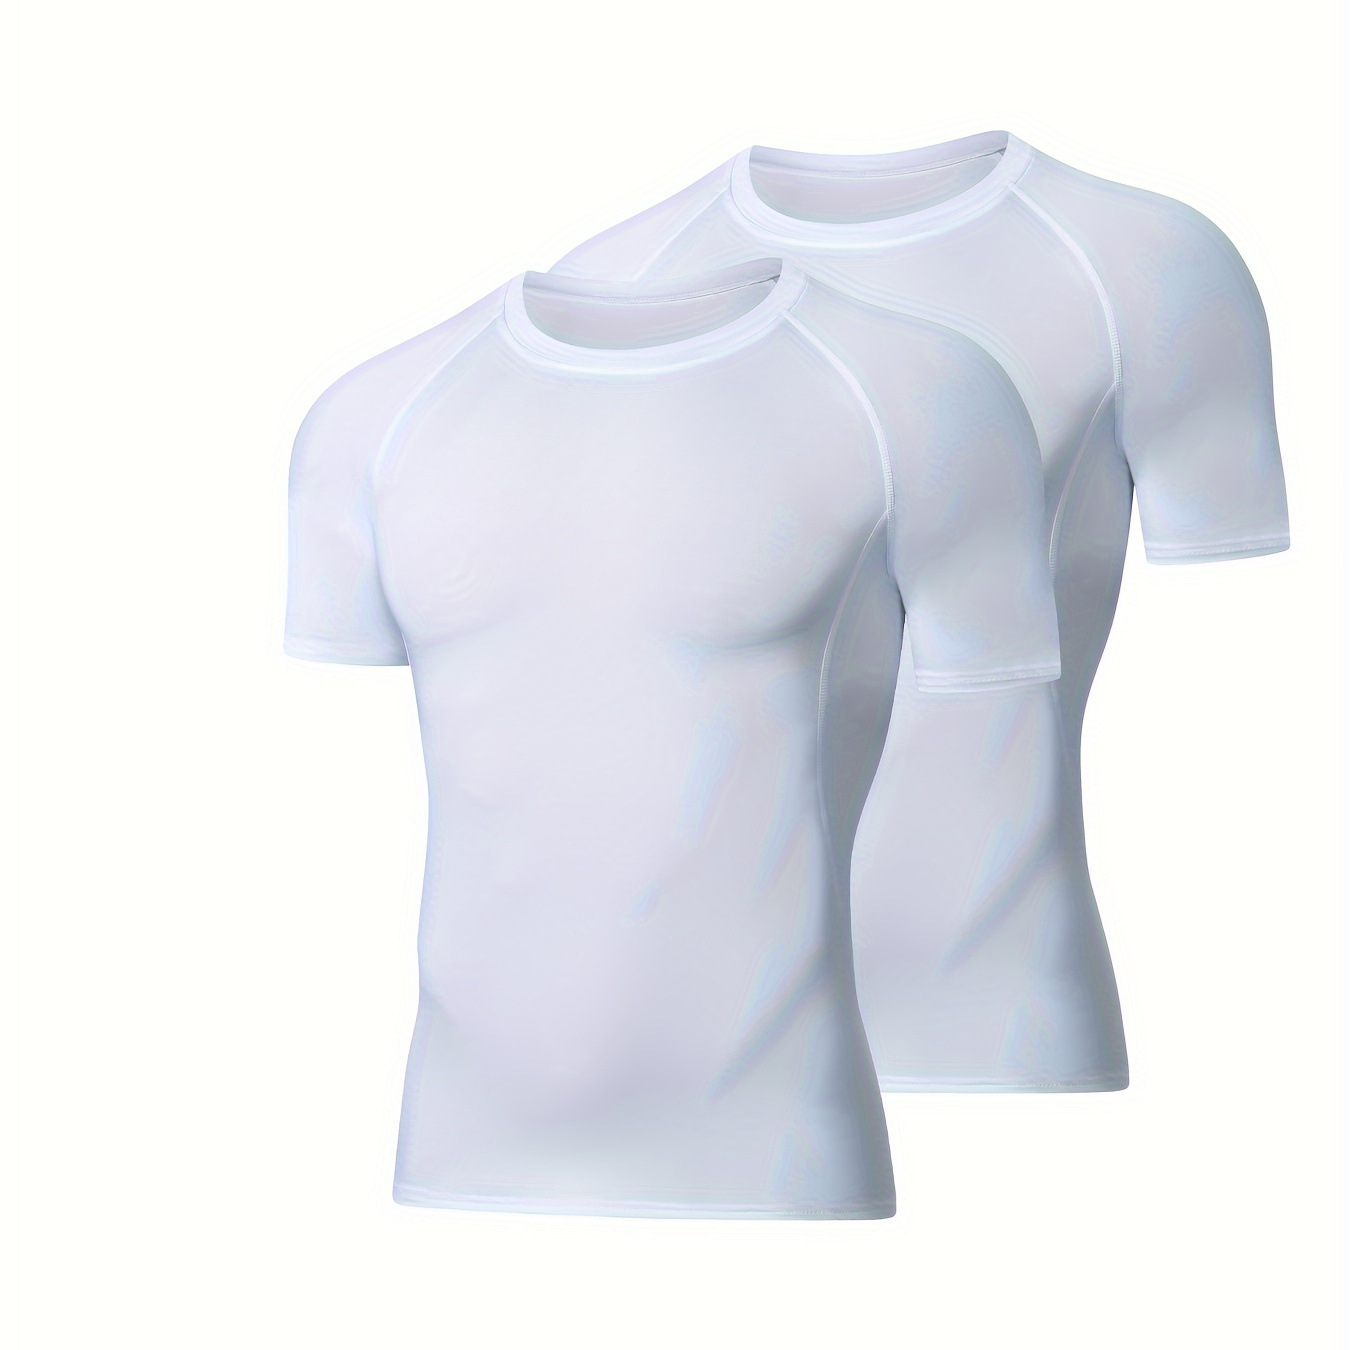 

2pcs Men's Compression T-shirts, High Stretch Crew Neck Sweat-absorbing Quick-drying T-shirts For Men's Fitness Training